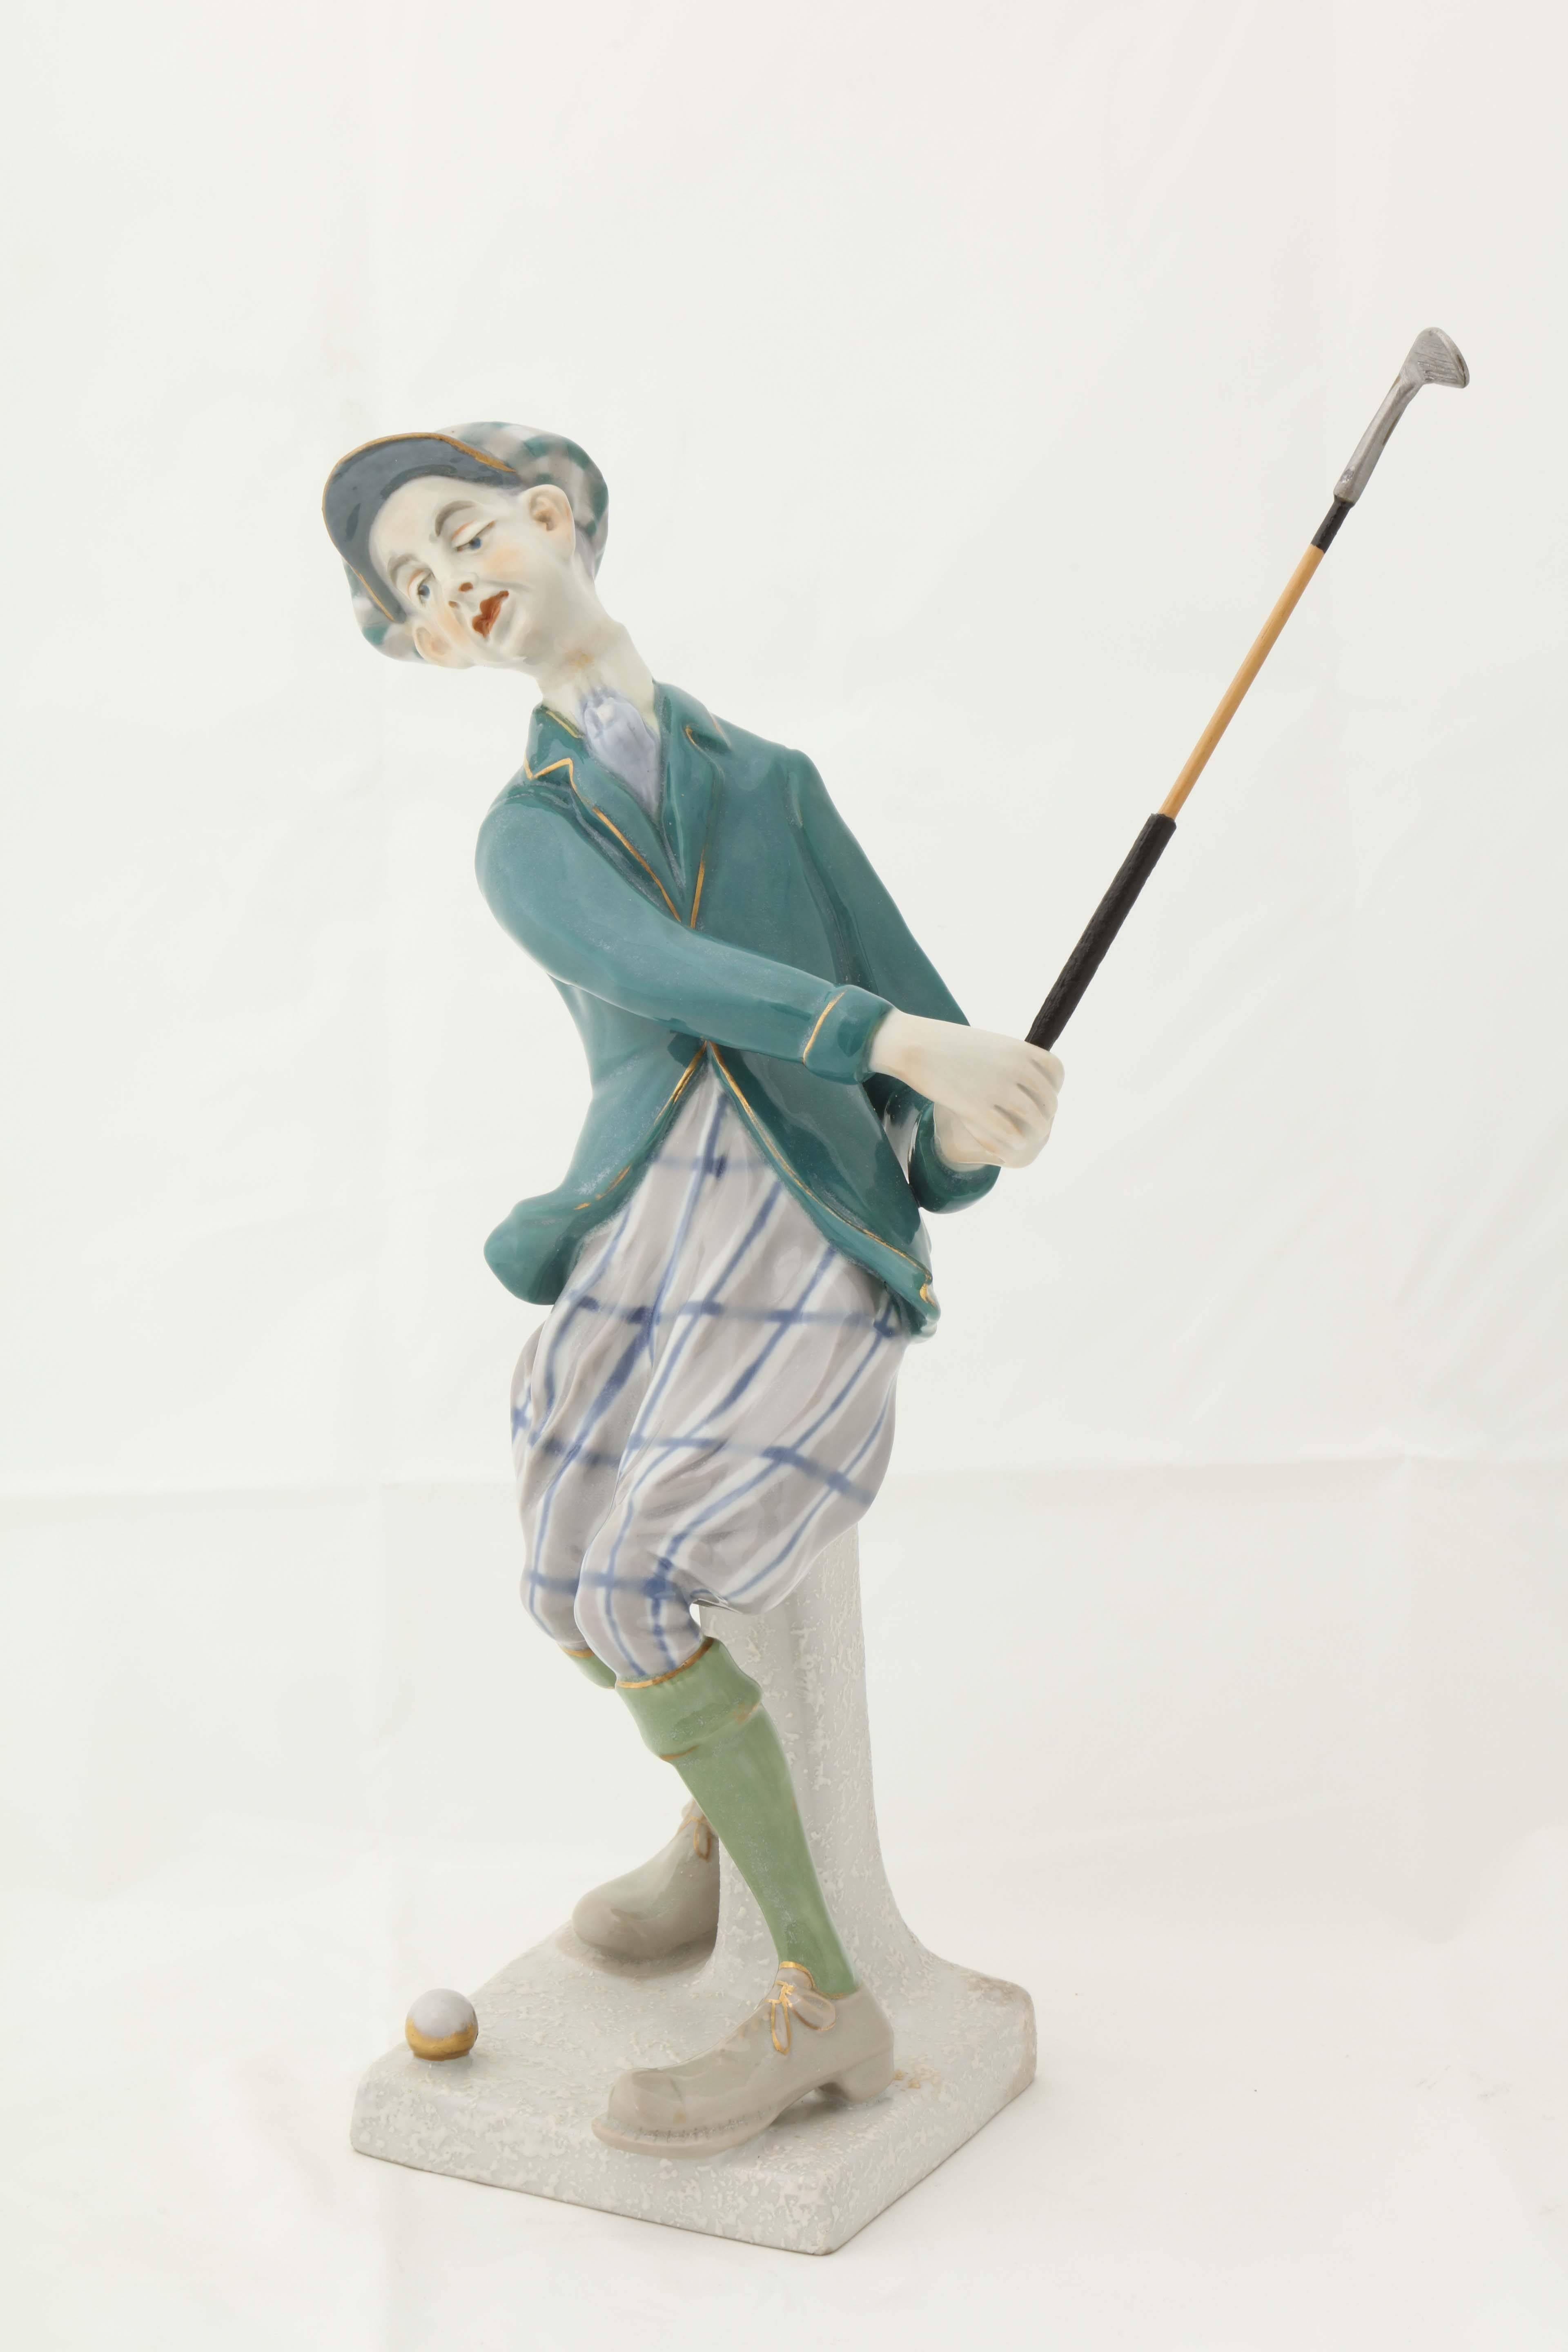 A Rare Ceramic Sport Caricature Figure beautifully glazed and
 wildly whimsical. Mint Condition. Make with the Amphora Oval Mark, the Amphora Crown, Imperial Amphora Czechoslovakia mark,
impressed 5017 /  1.

